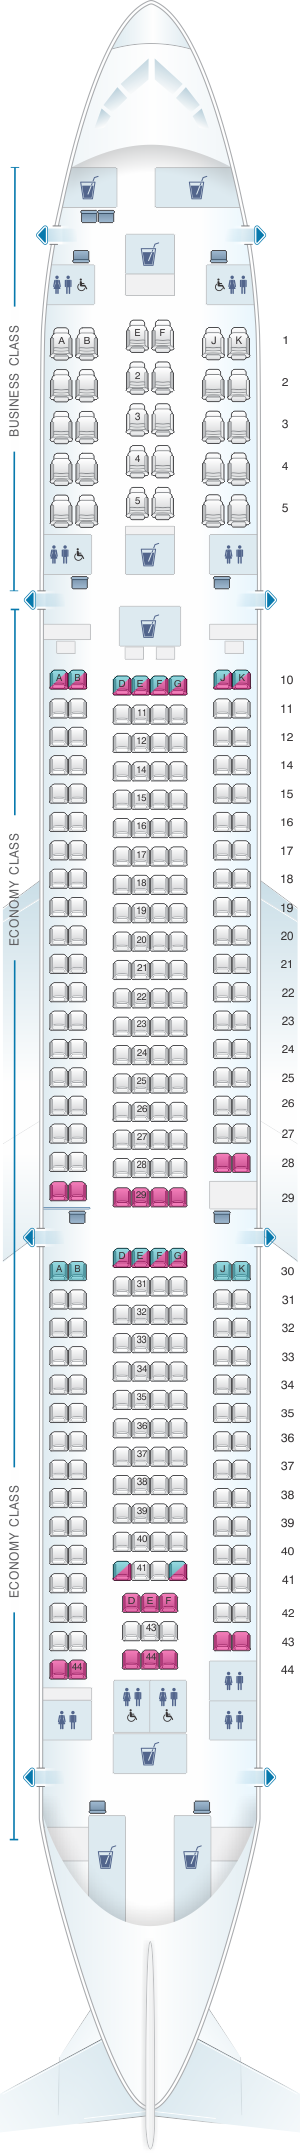 Seat Map Qatar Airlines Airbus A330 300 295pax 